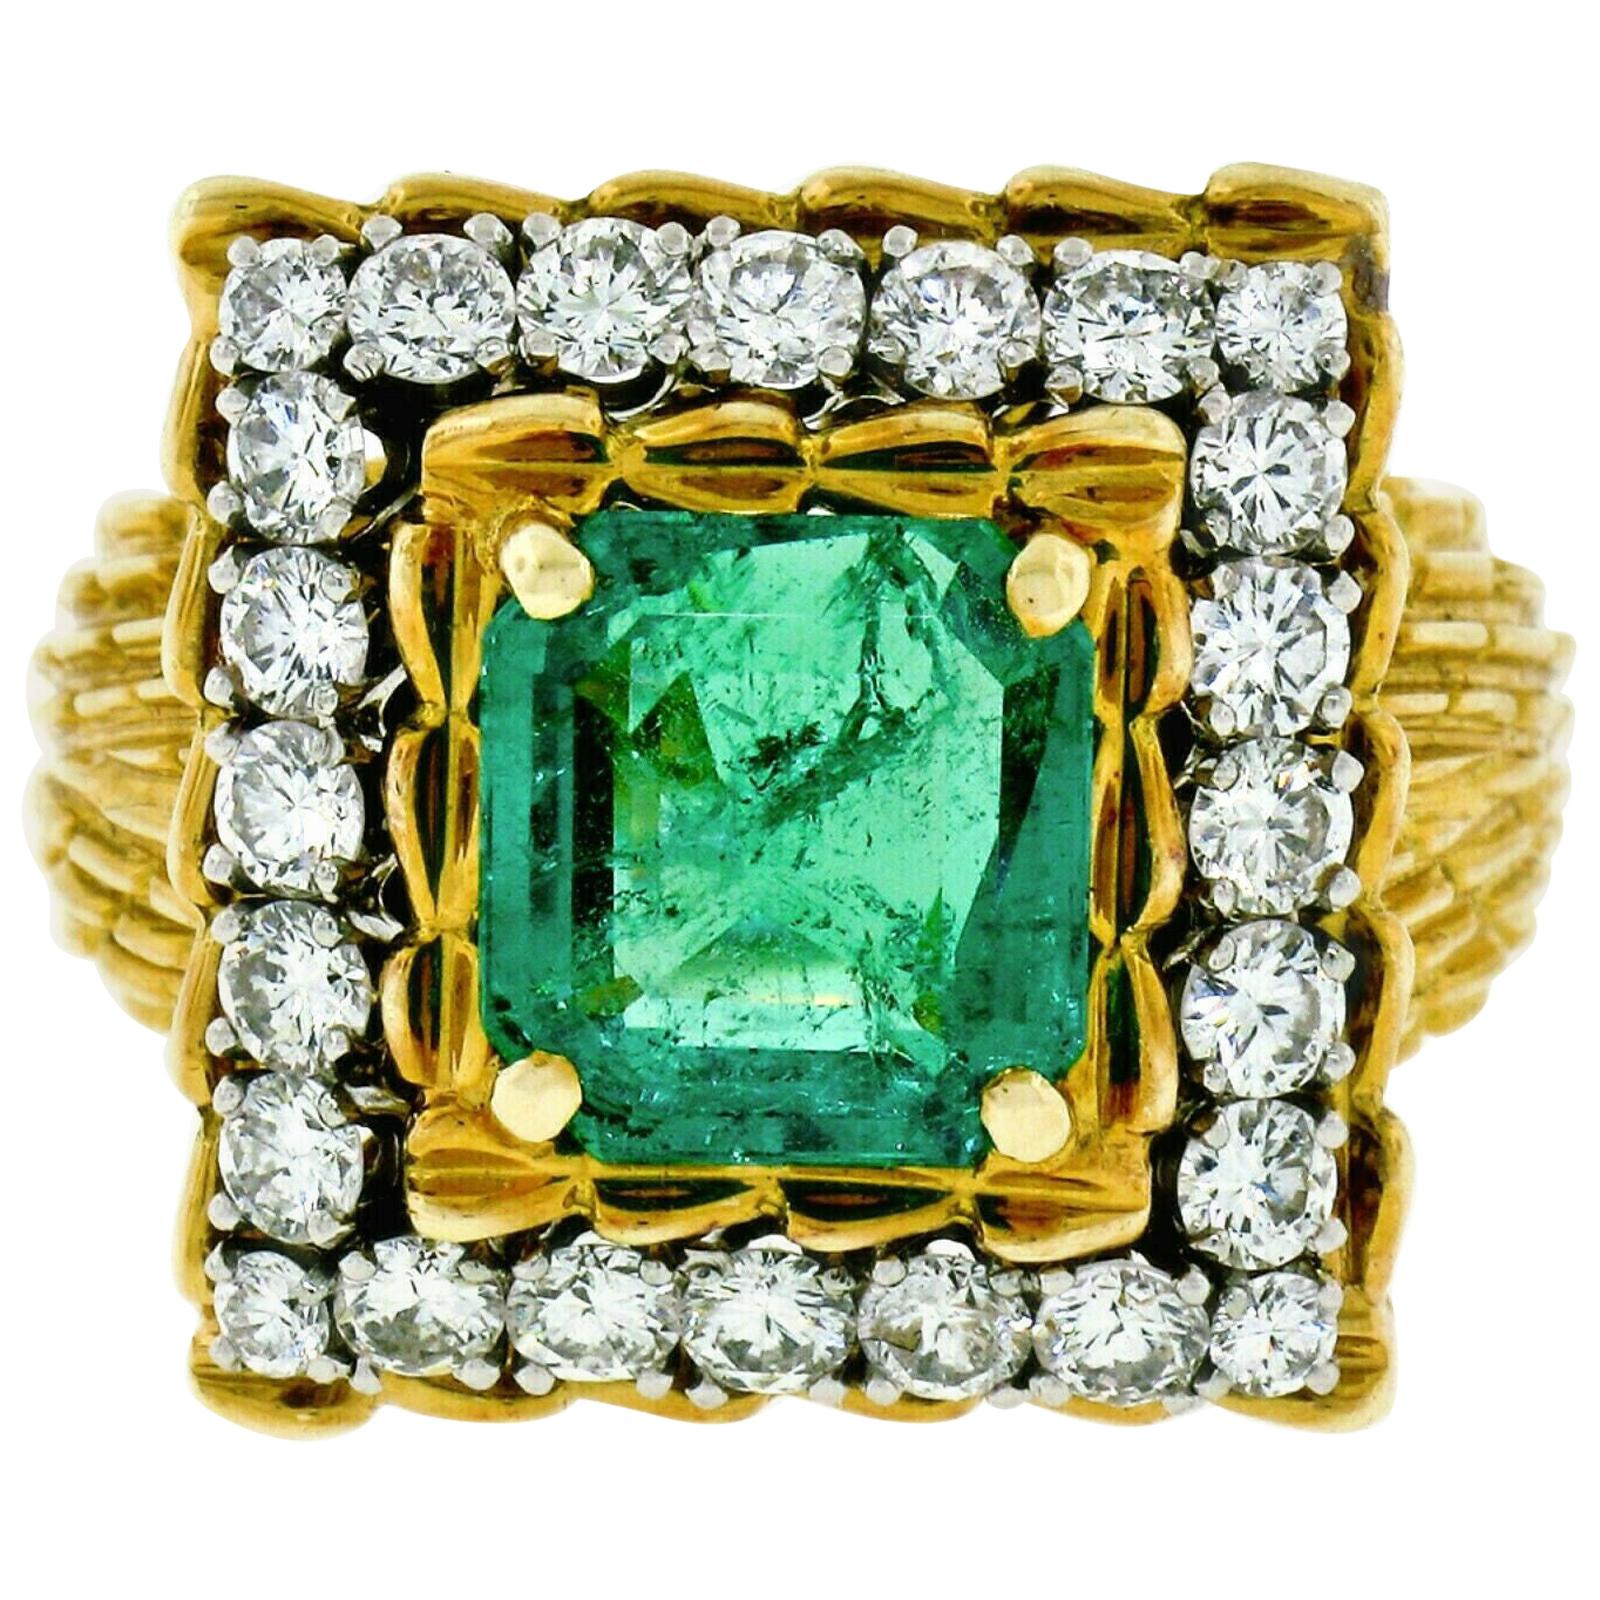 Vintage 18k Gold AGL 4.27ct Colombian Emerald and Diamond Textured Cocktail Ring